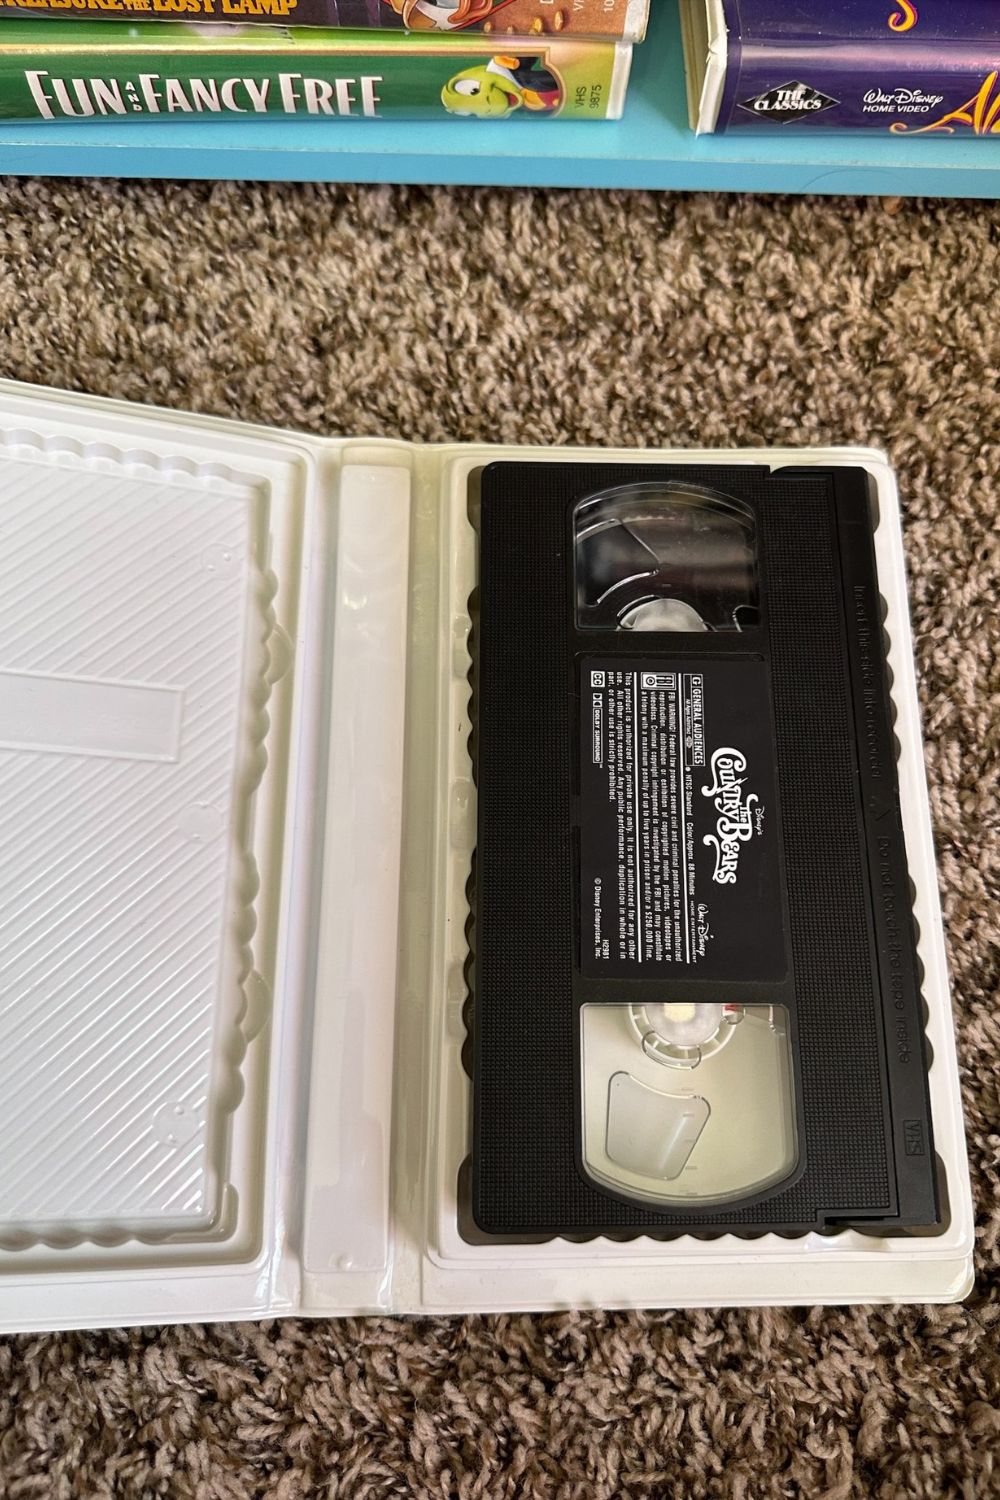 THE COUNTRY BEARS VHS*